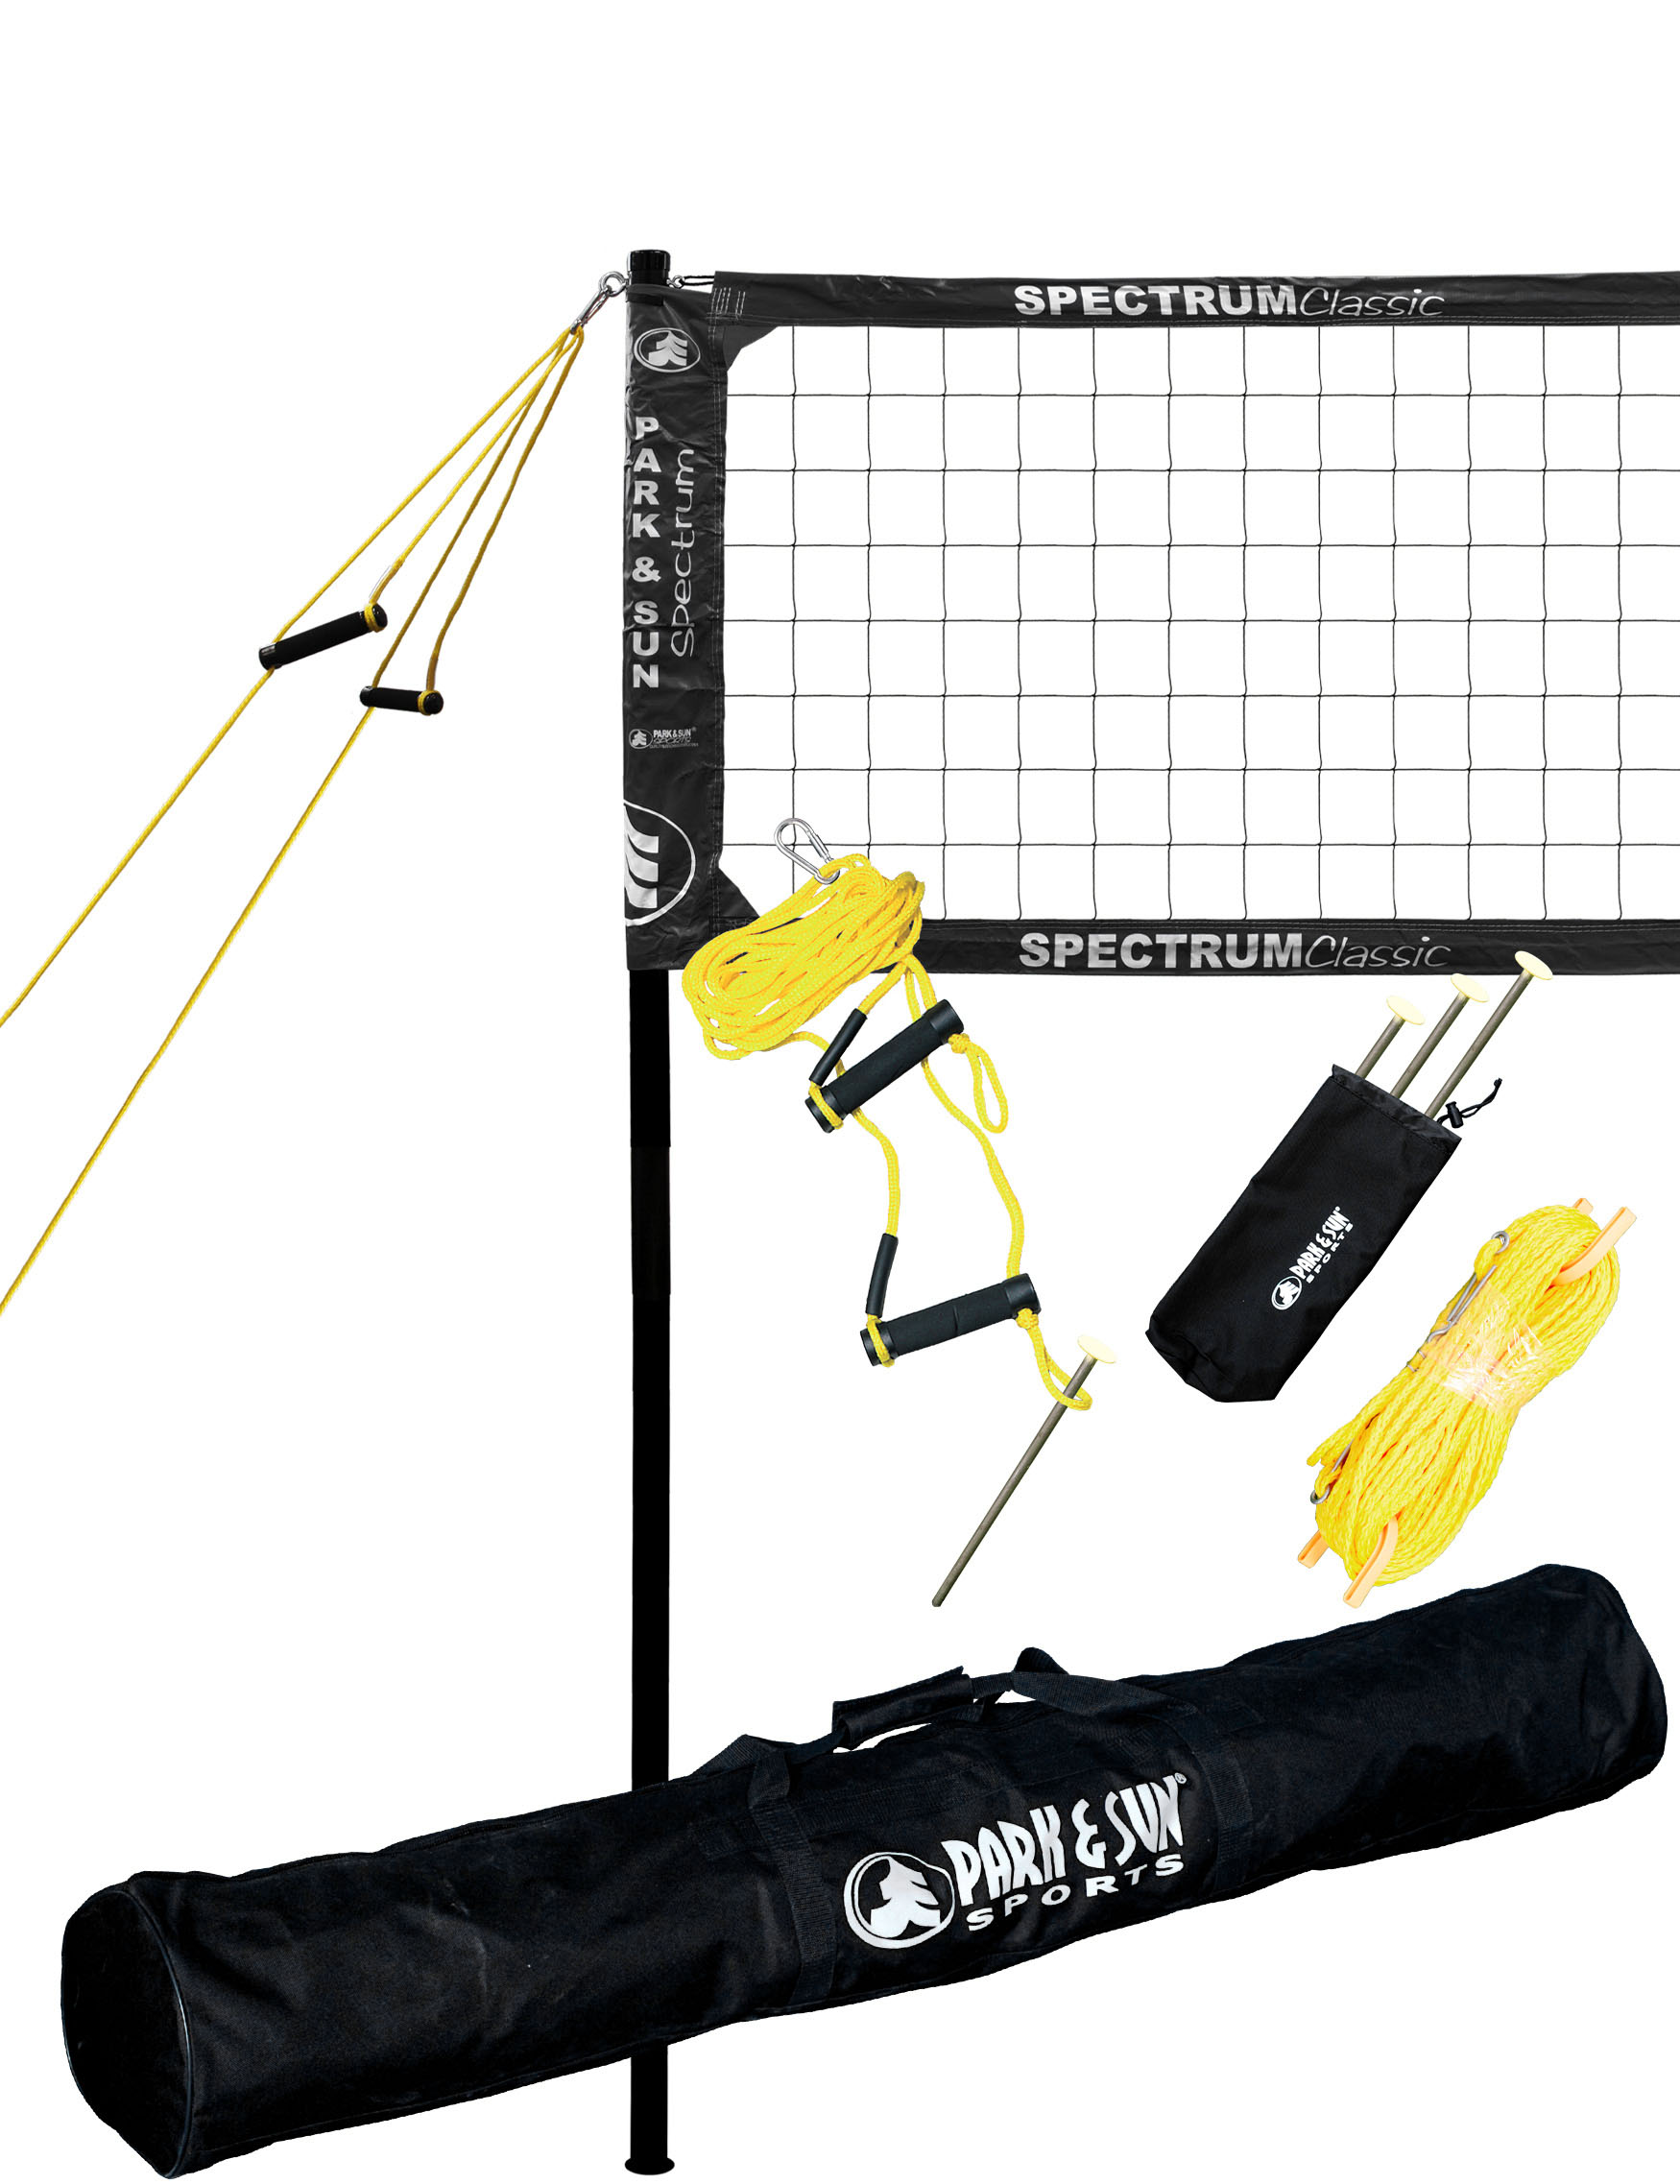 Sport Series Park & Sun Sports Portable Outdoor Badminton Net System with Carrying Bag and Accessories 